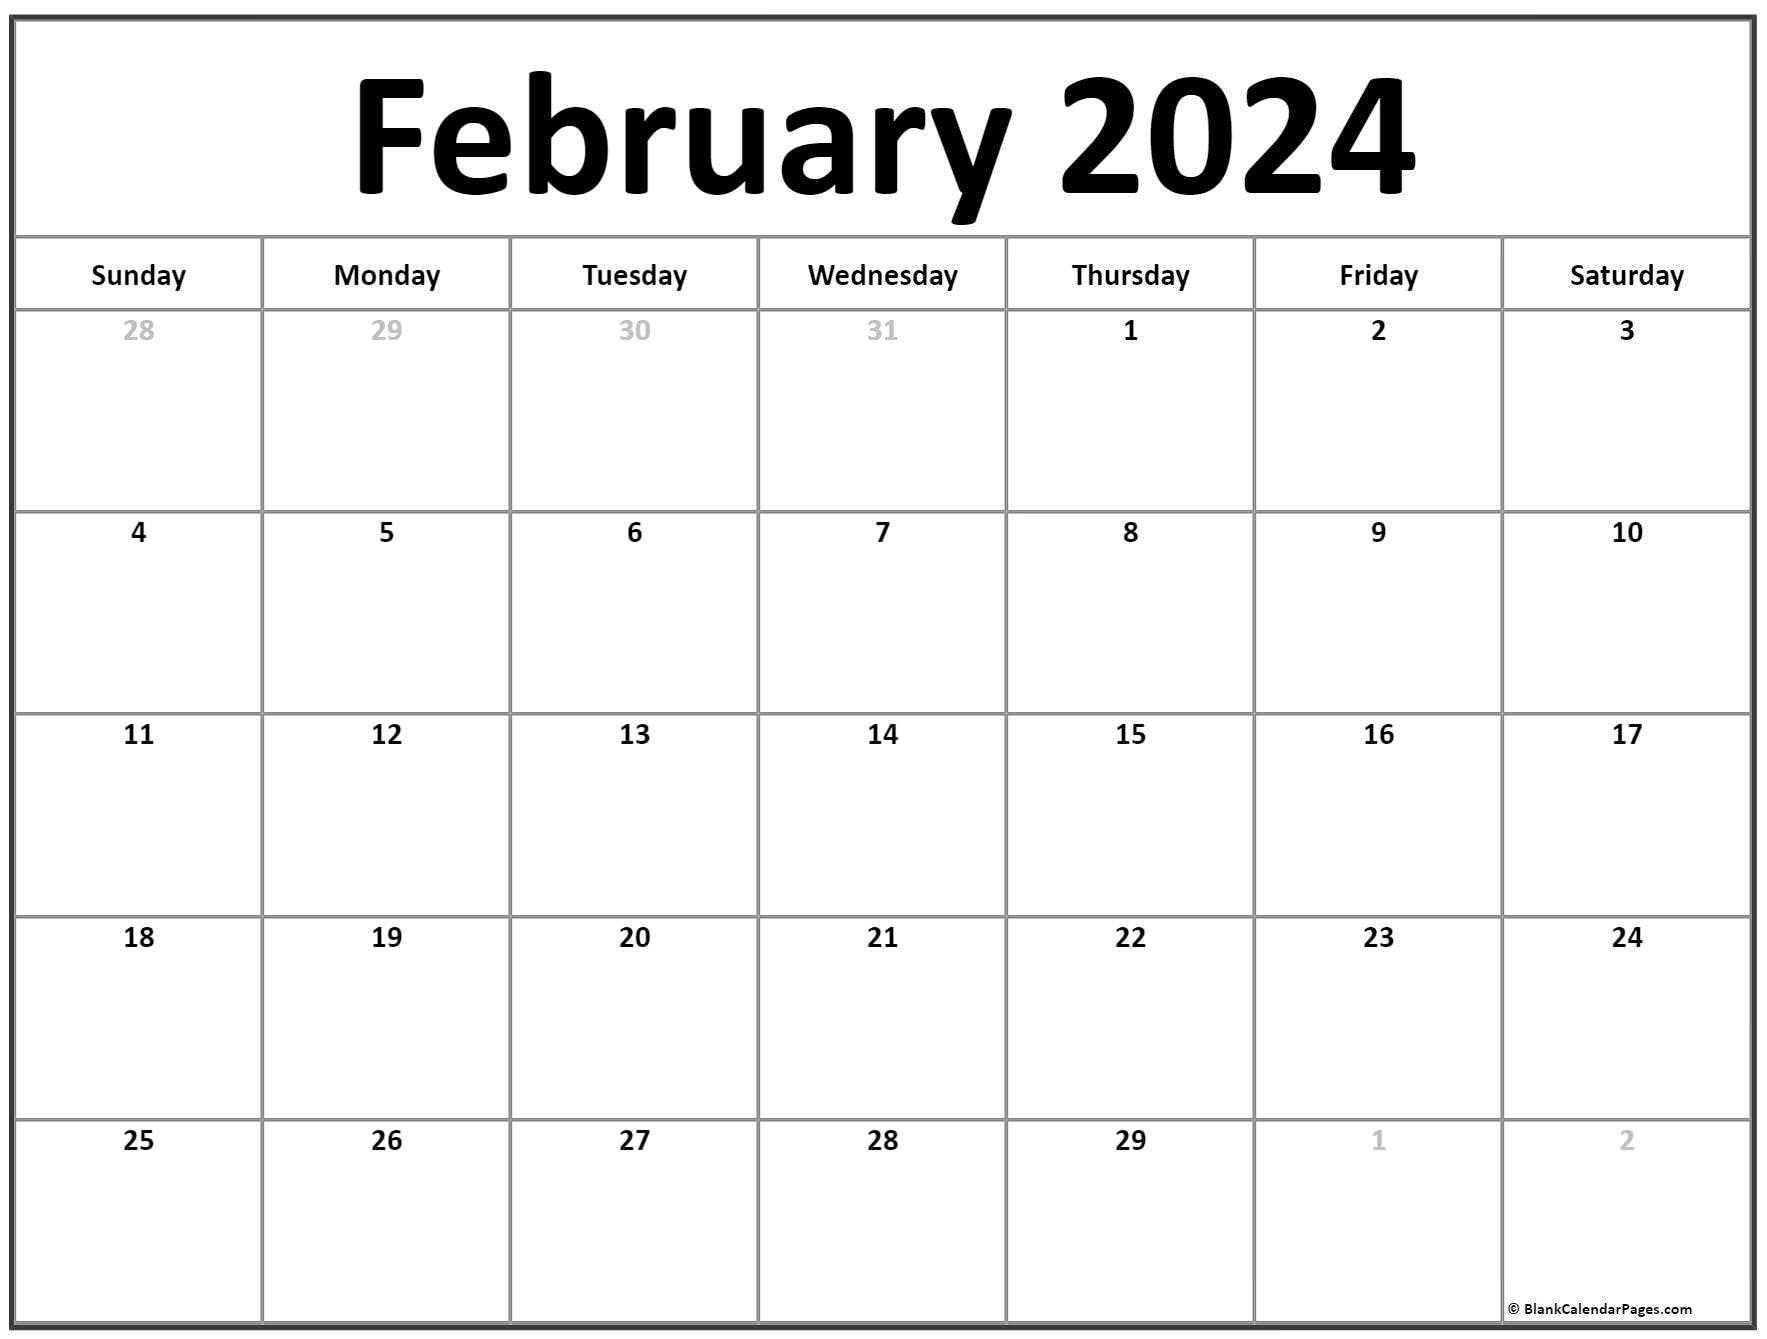 February 2021 Calendar Free Printable Calendar Download yearly calendar 2021, weekly calendar 2021 and monthly calendar 2021 for free. https blankcalendarpages com february 2021 calendar